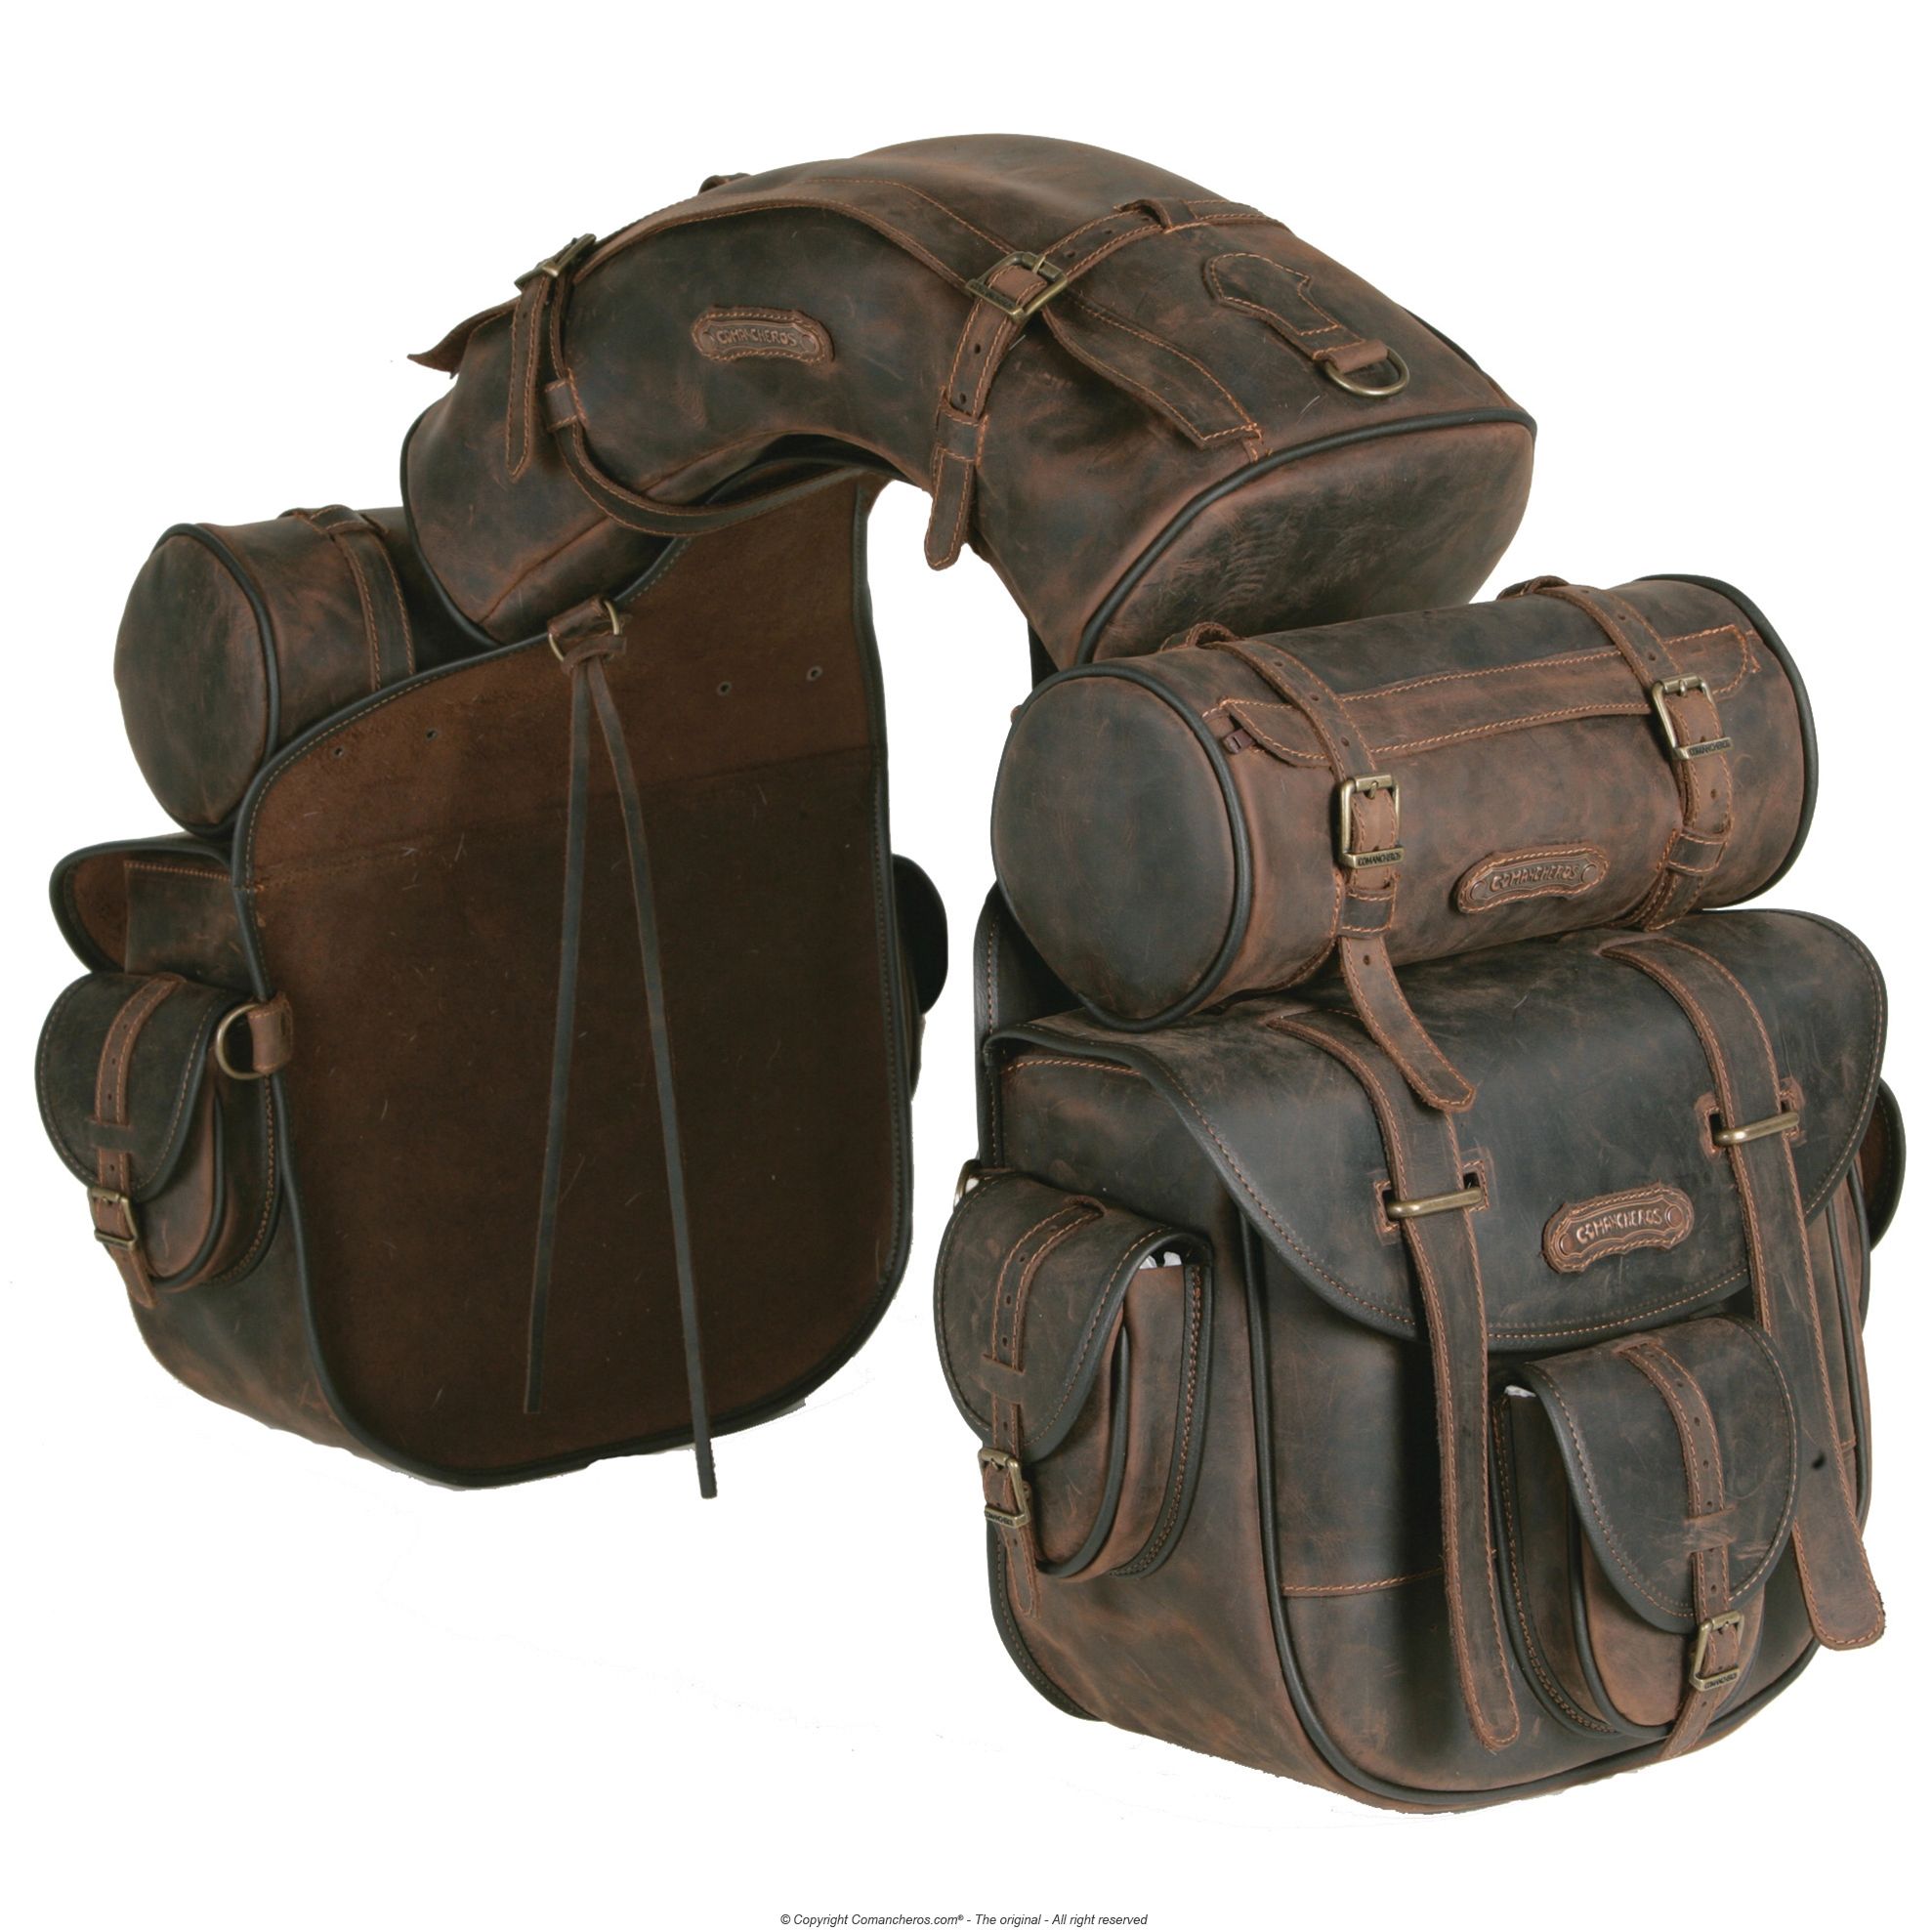 Saddle Bags and Accessories